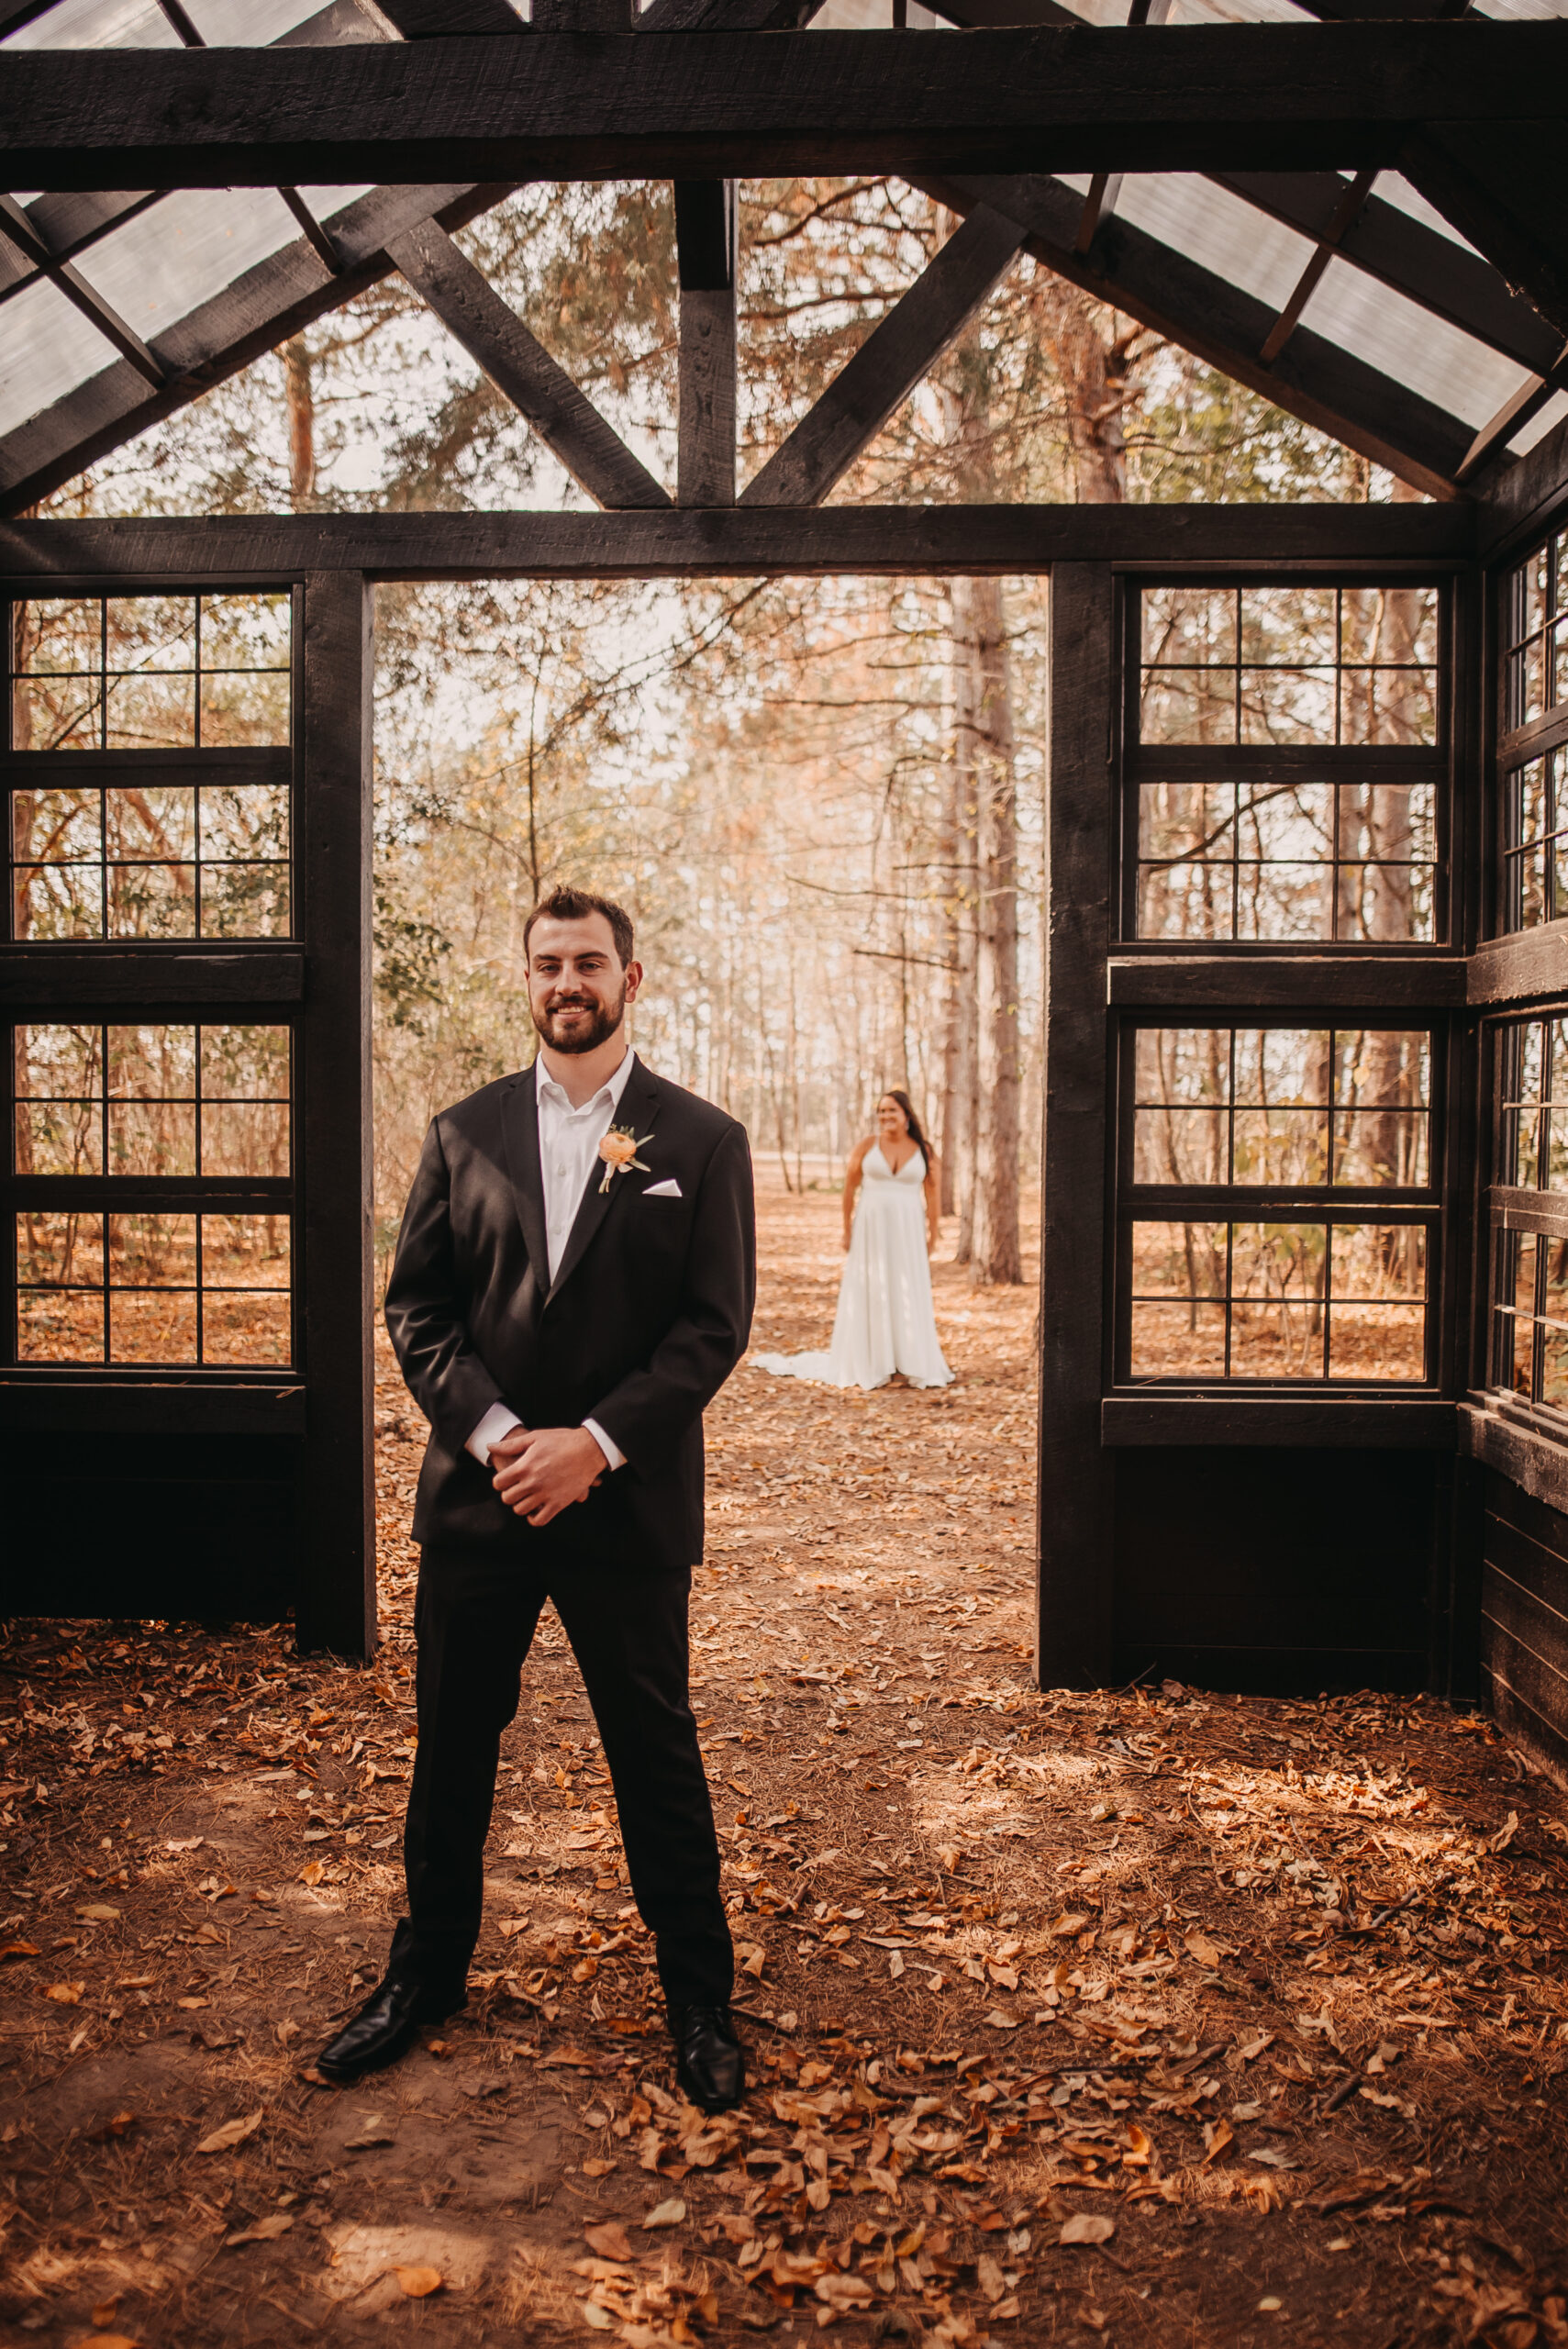 First Look, Couples photos, Groom reaction, Minnesota Wedding Photographer, Minnesota Photographer, Minnesota Wedding, Ivory North Co., Ivory North Co. Wedding, Mora Minnesota Wedding, Wedding Inspiration, Wedding Ideas, Wedding Photos, Wedding Photography, Outdoor Wedding, Fall Wedding,  Unique Wedding Photos, Fun Wedding Photos, Wedding Inspo